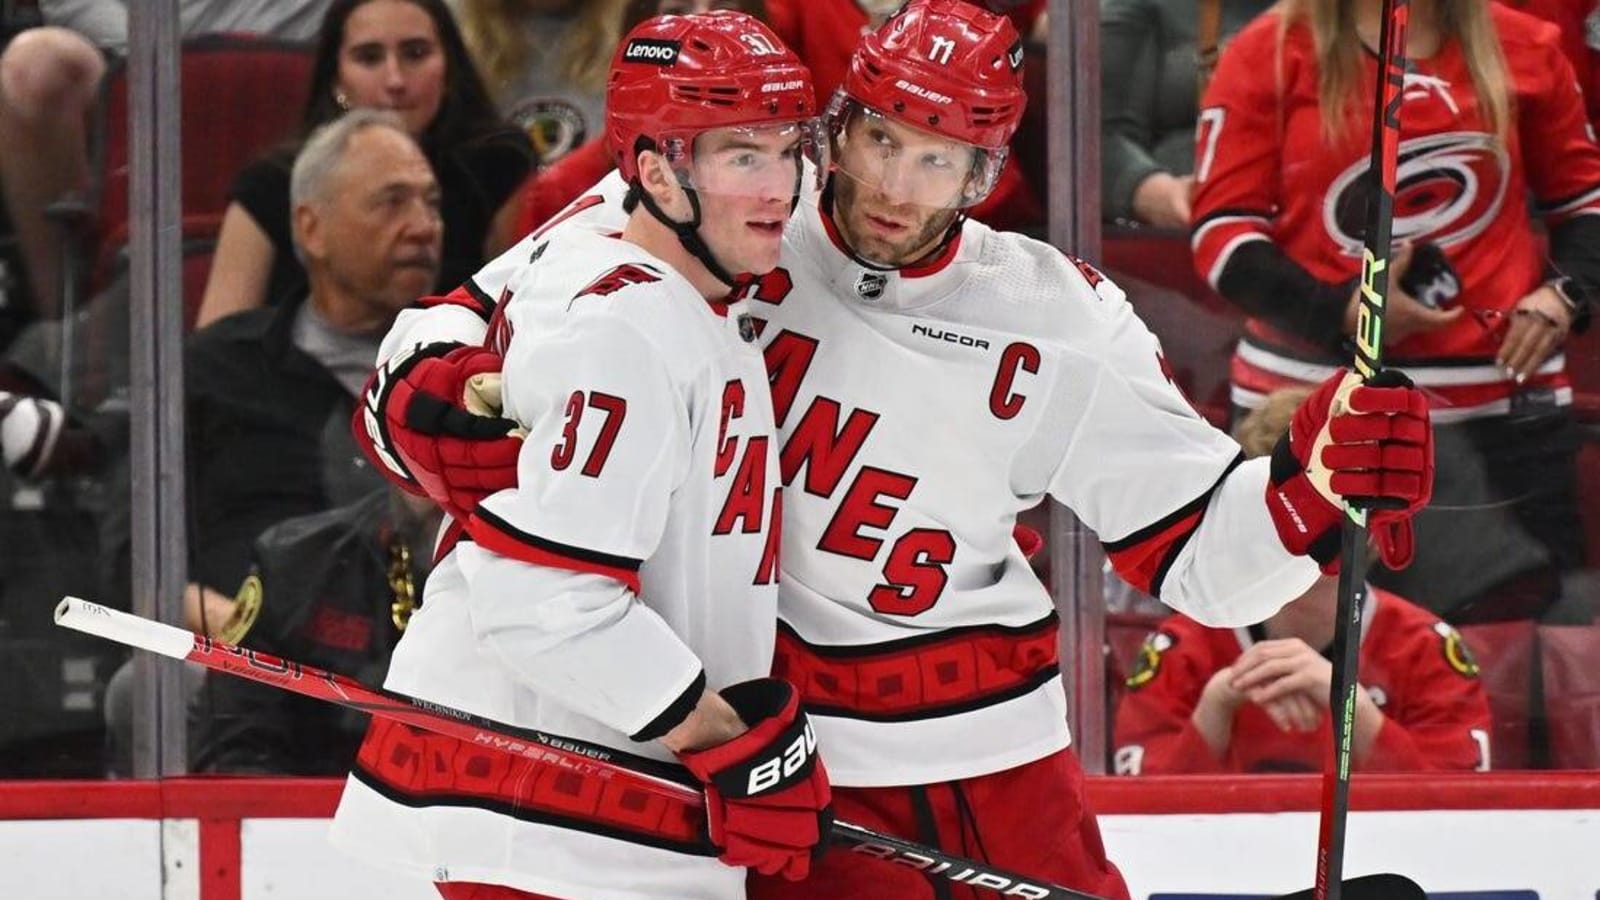 Hurricanes visit Blue Jackets for last test before playoffs